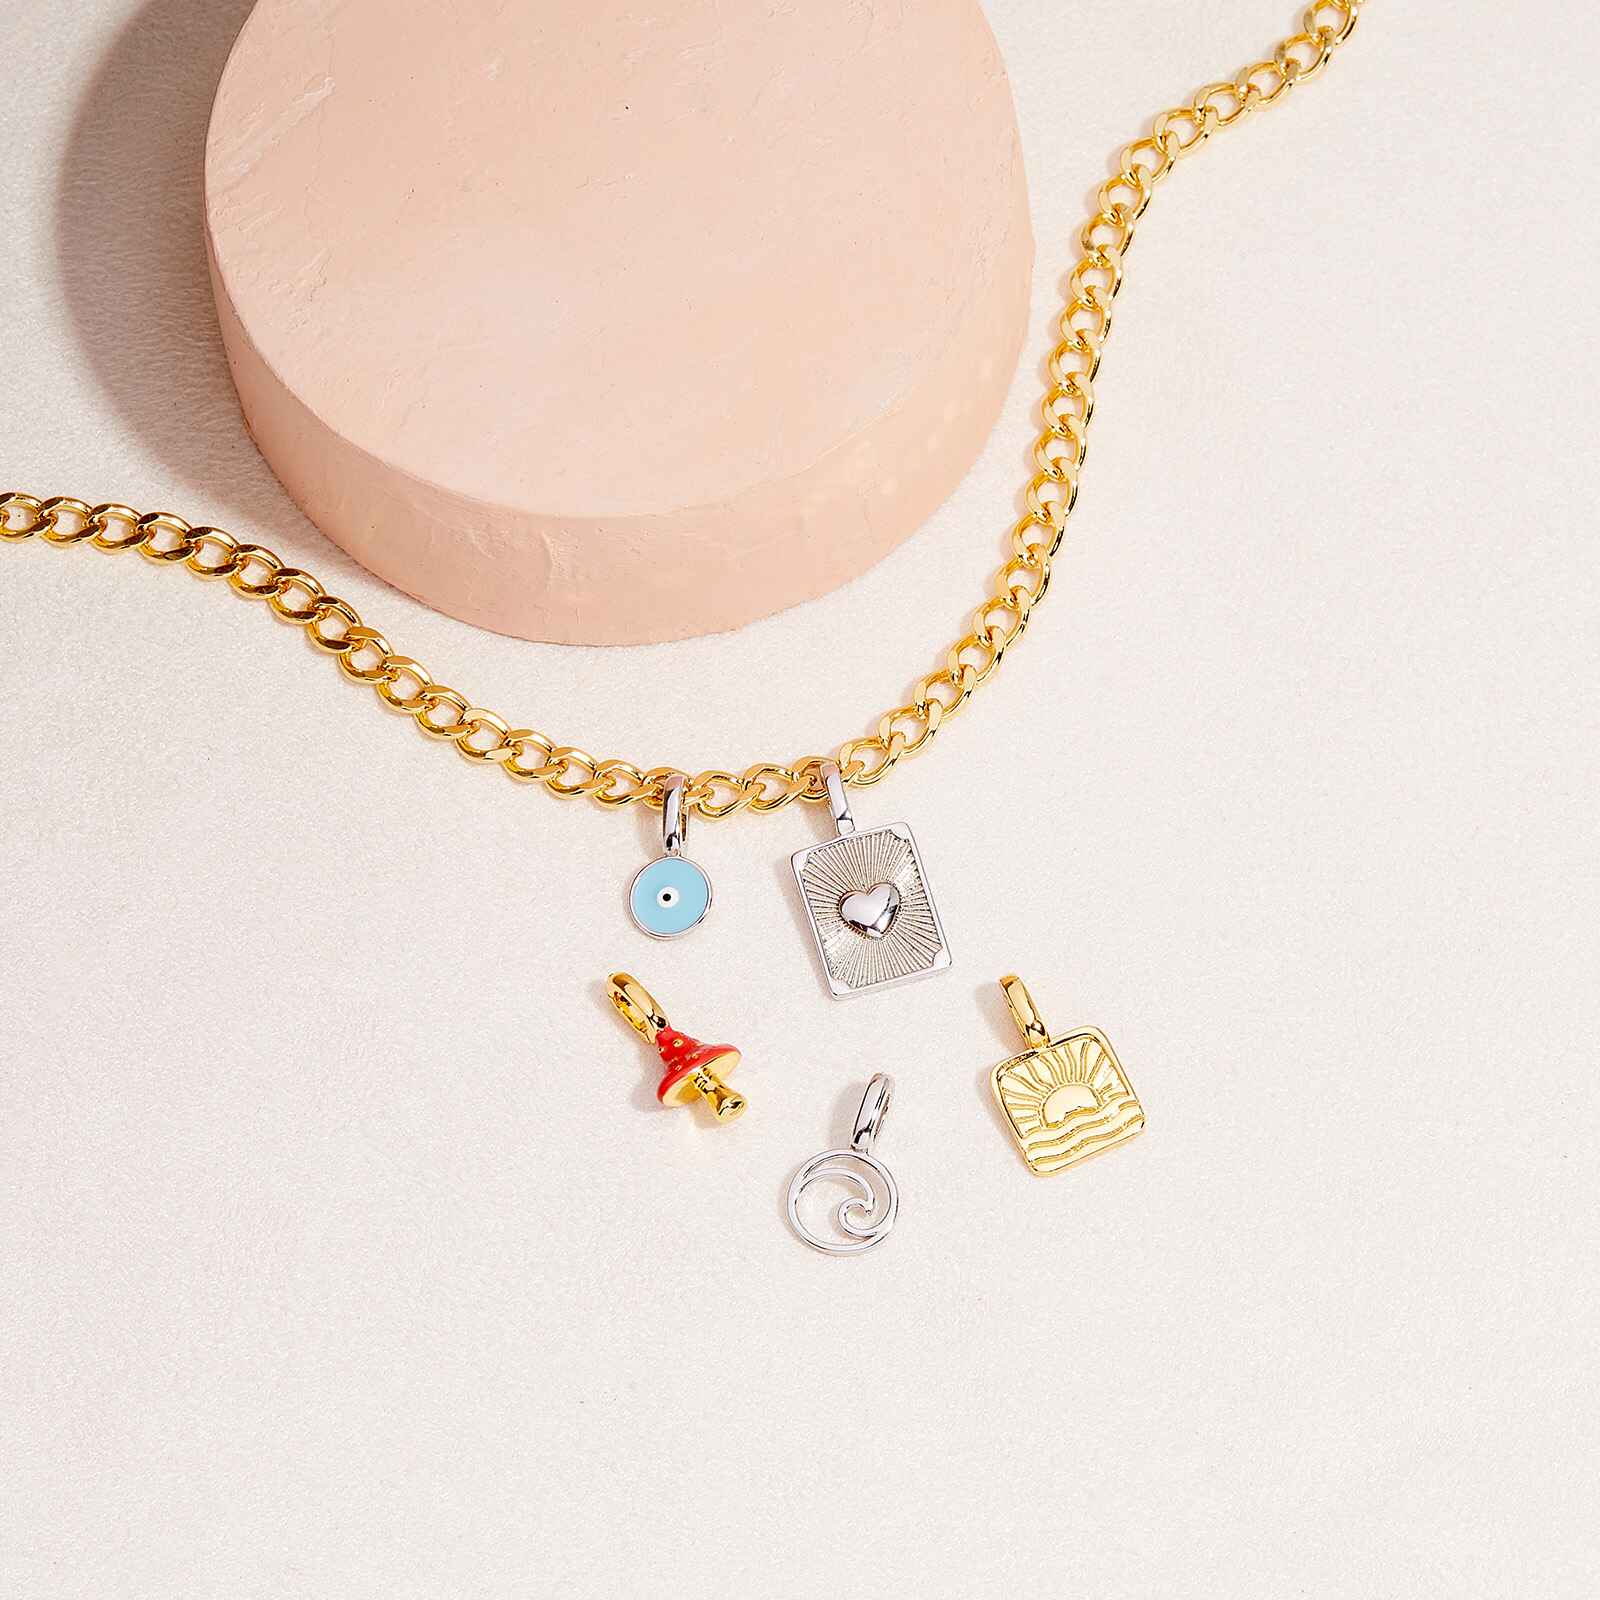 Mini Mushroom Charm Necklace in Solid 9k Yellow Gold – Aiden Jae